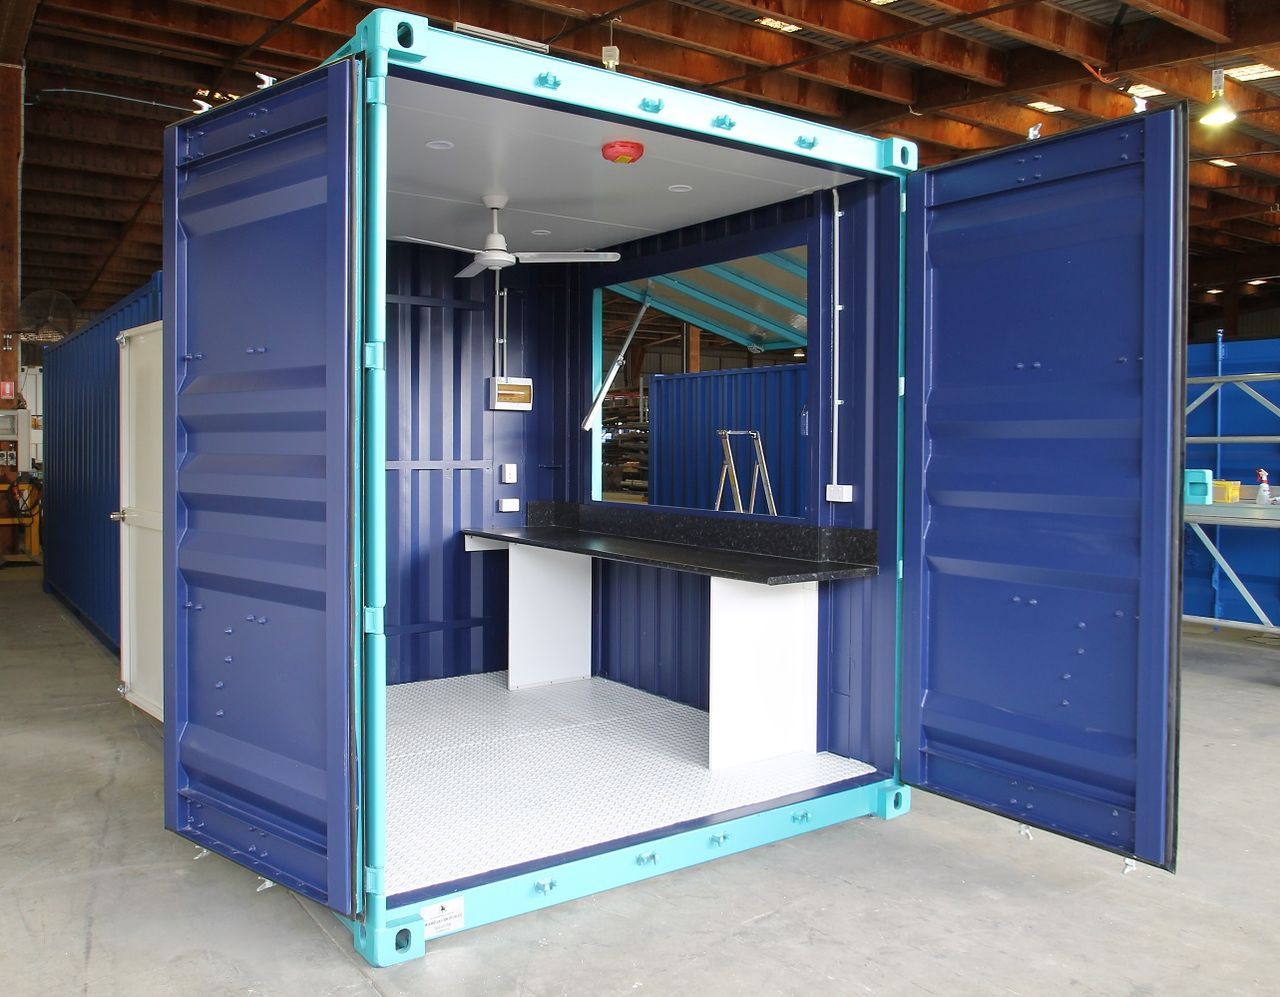 10Ft Mini Pop-Up Shop. Shipping Container Pop-Up Shops For Retail & Events